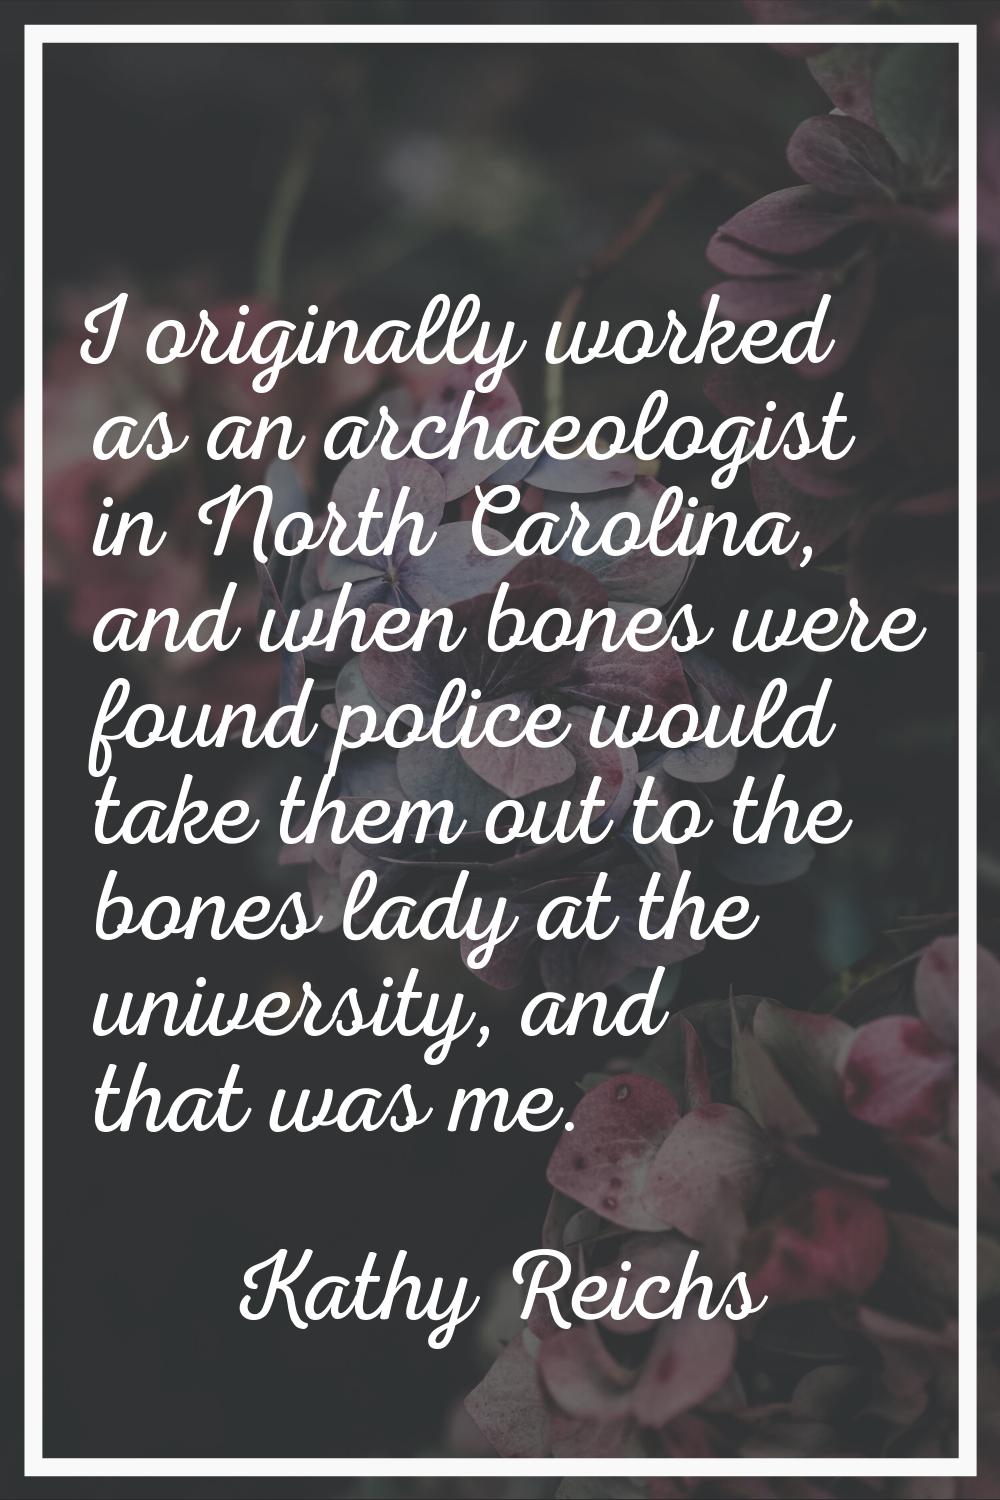 I originally worked as an archaeologist in North Carolina, and when bones were found police would t